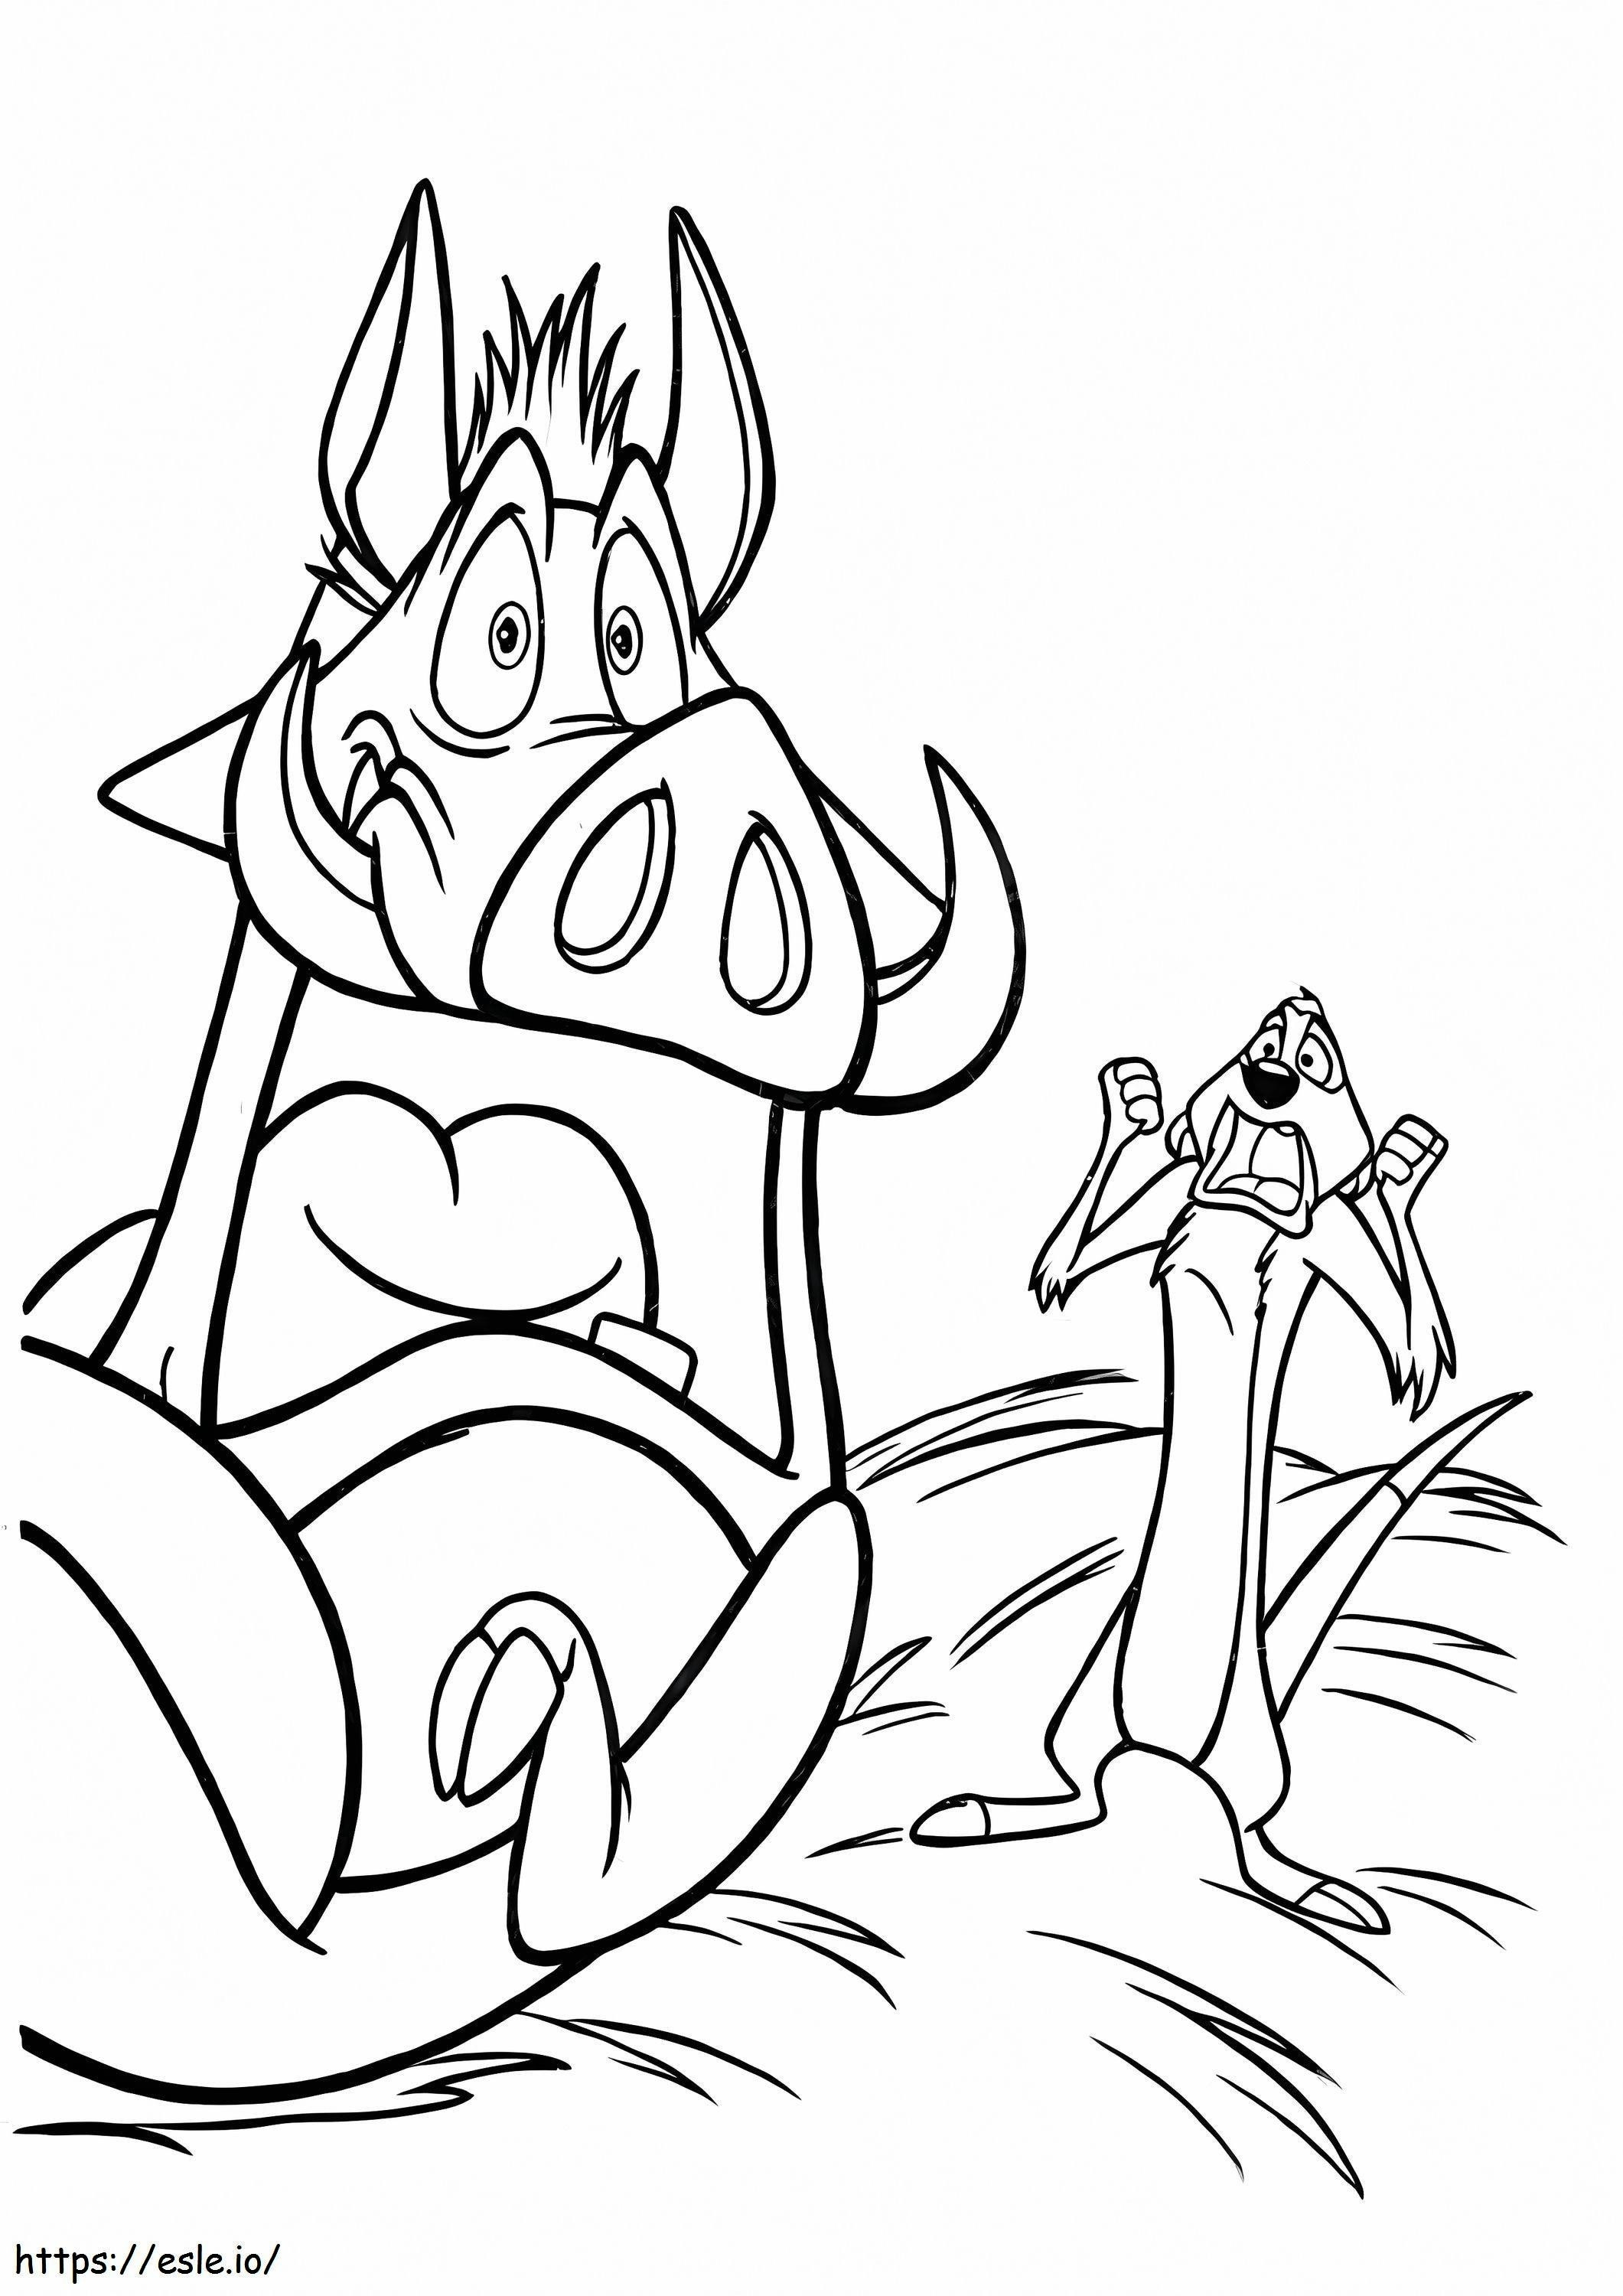 Timon And Pumbaa Are Screaming coloring page